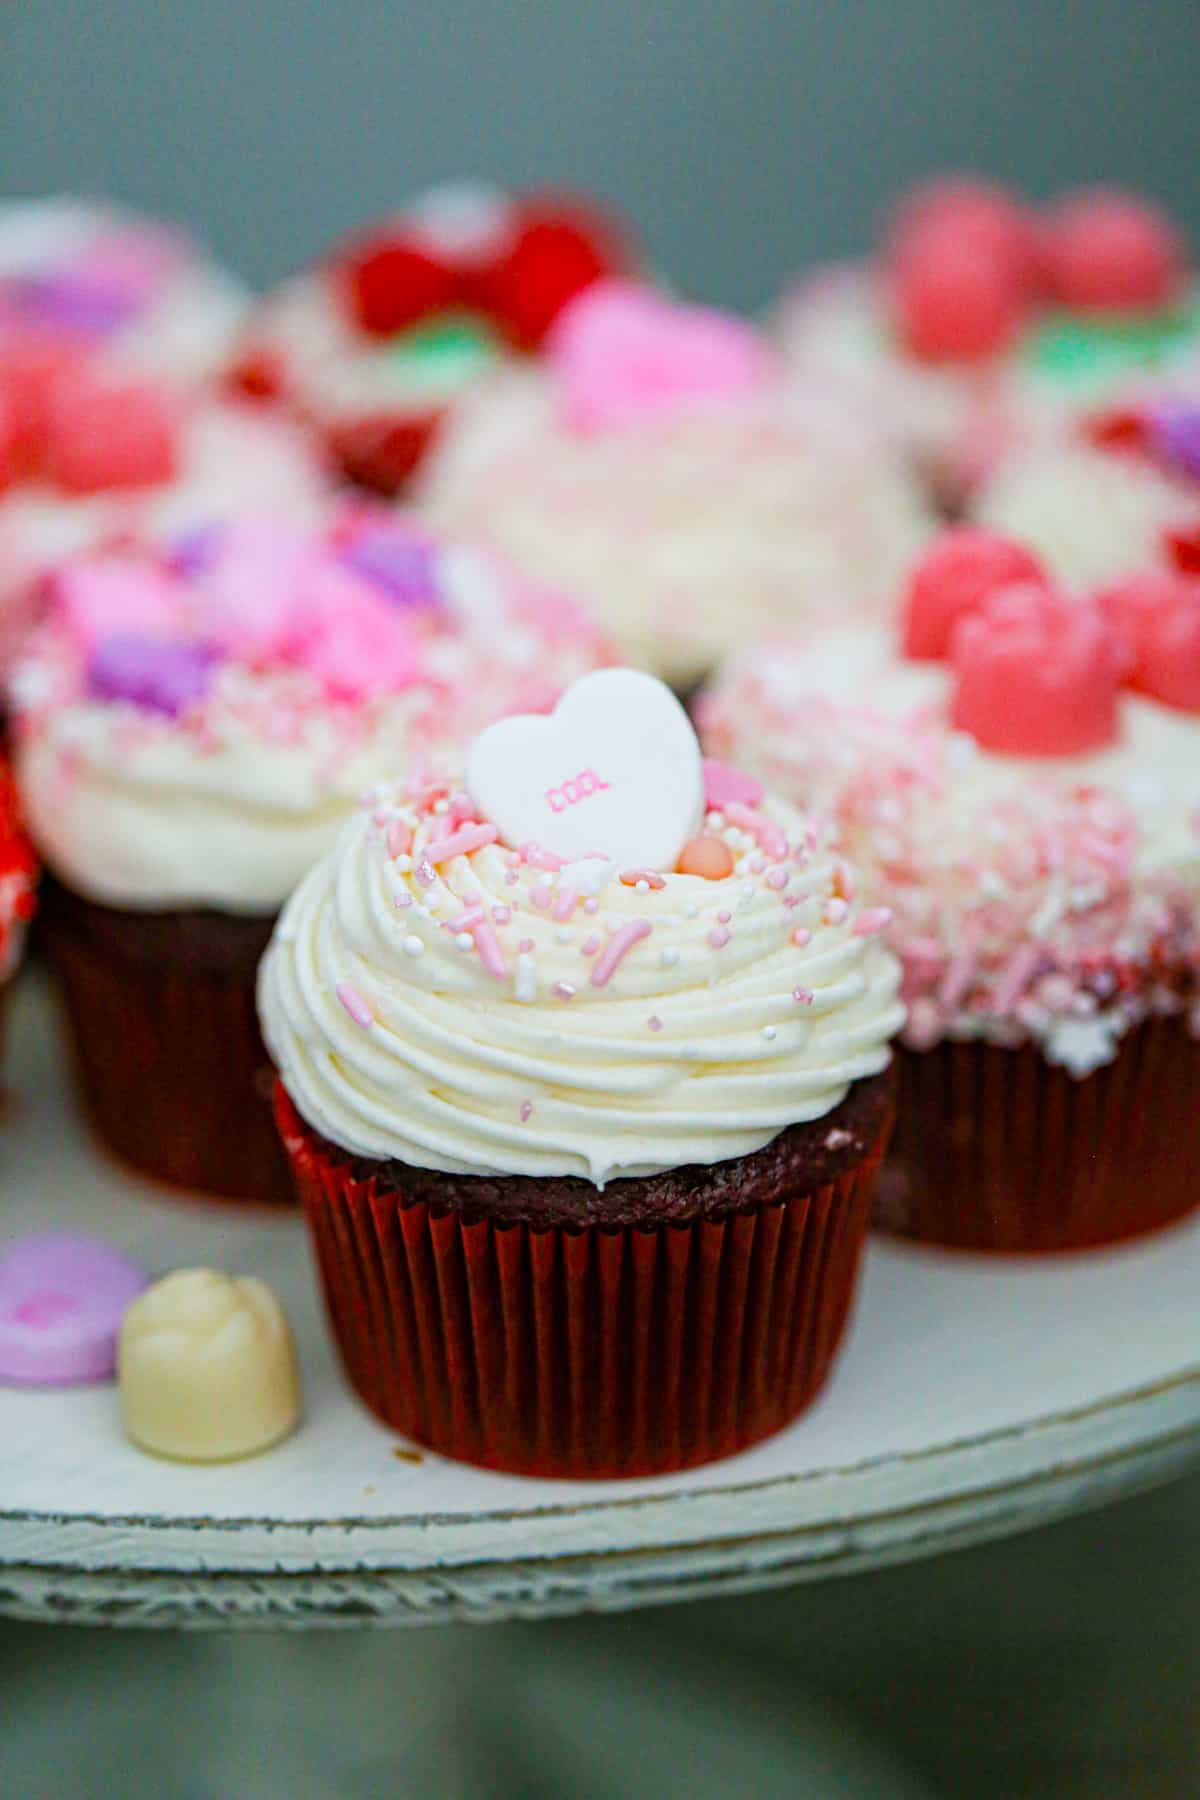 Brach's candy cupcakes for valentines day - red velvet with cream cheese frosting recipe